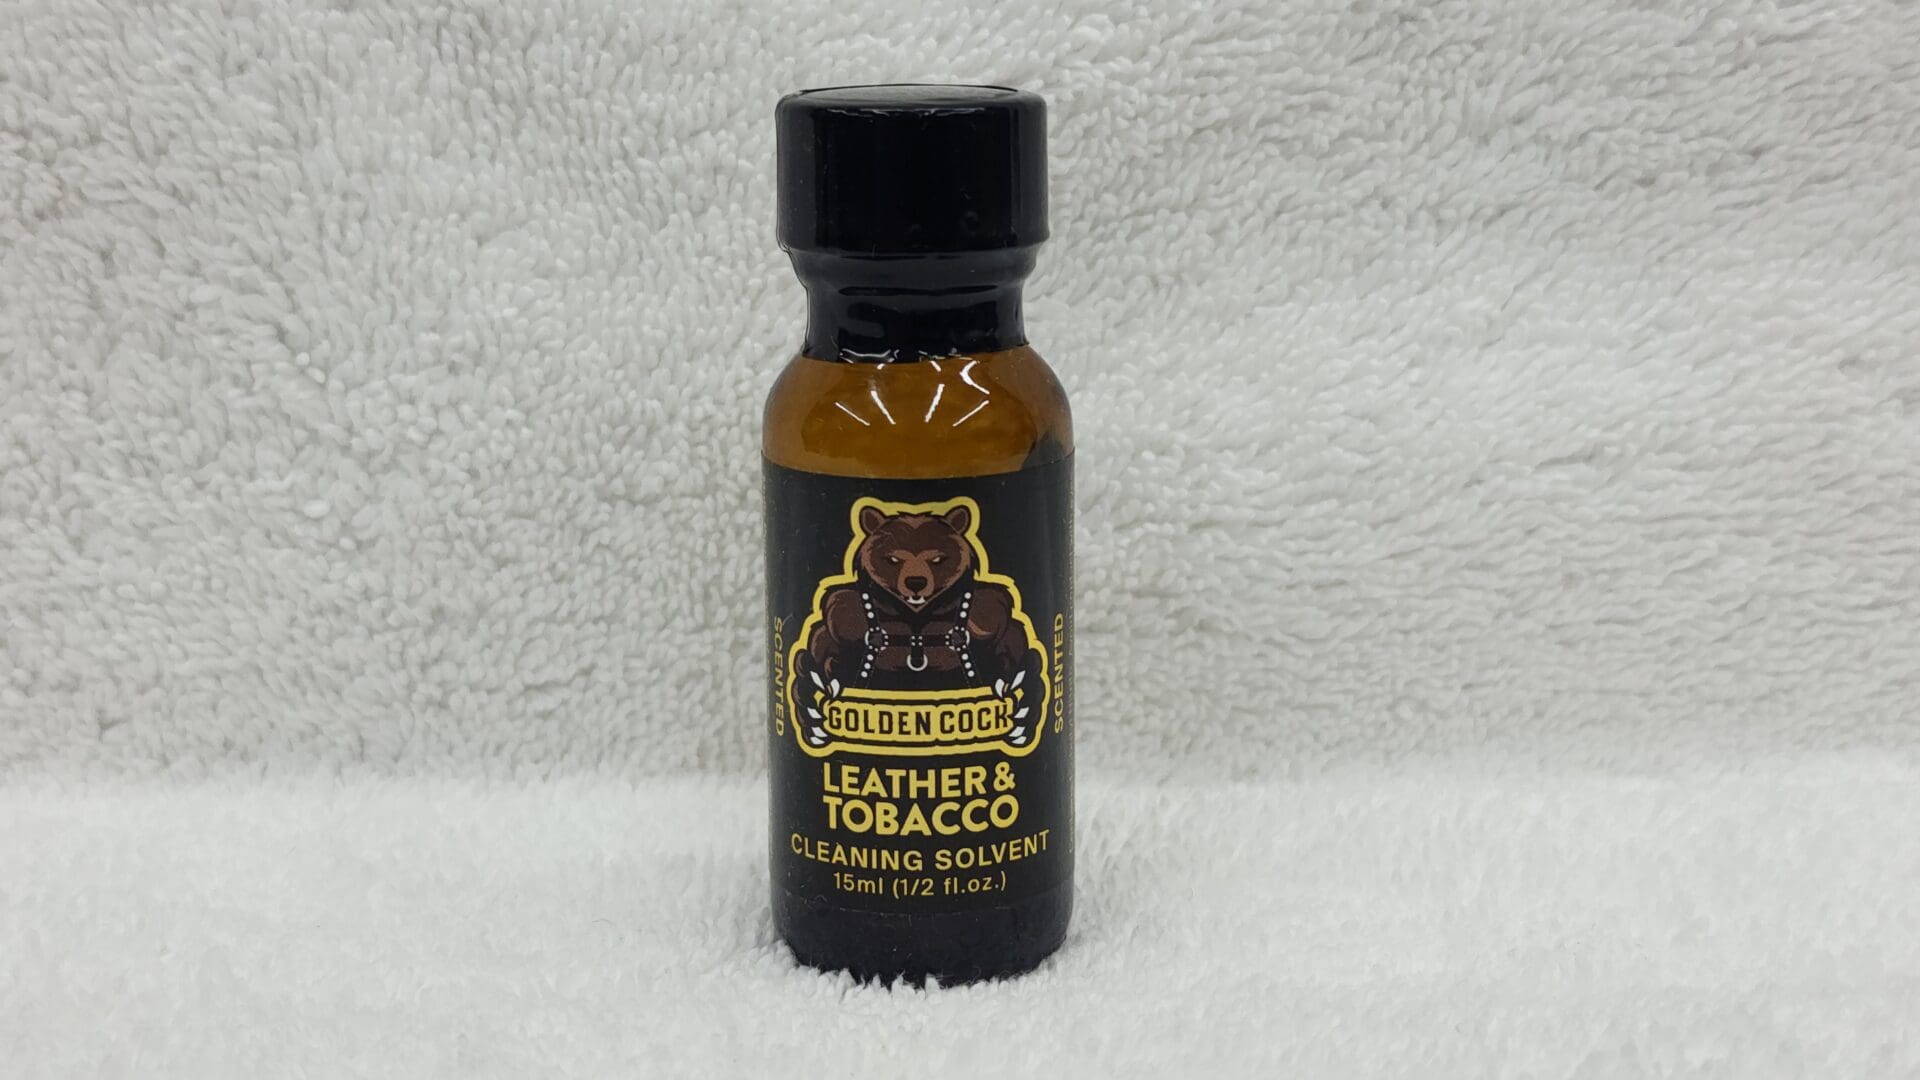 A bottle of Golden Cock Leather & Tobacco cleaning solvent on a white towel, 15 ml size.